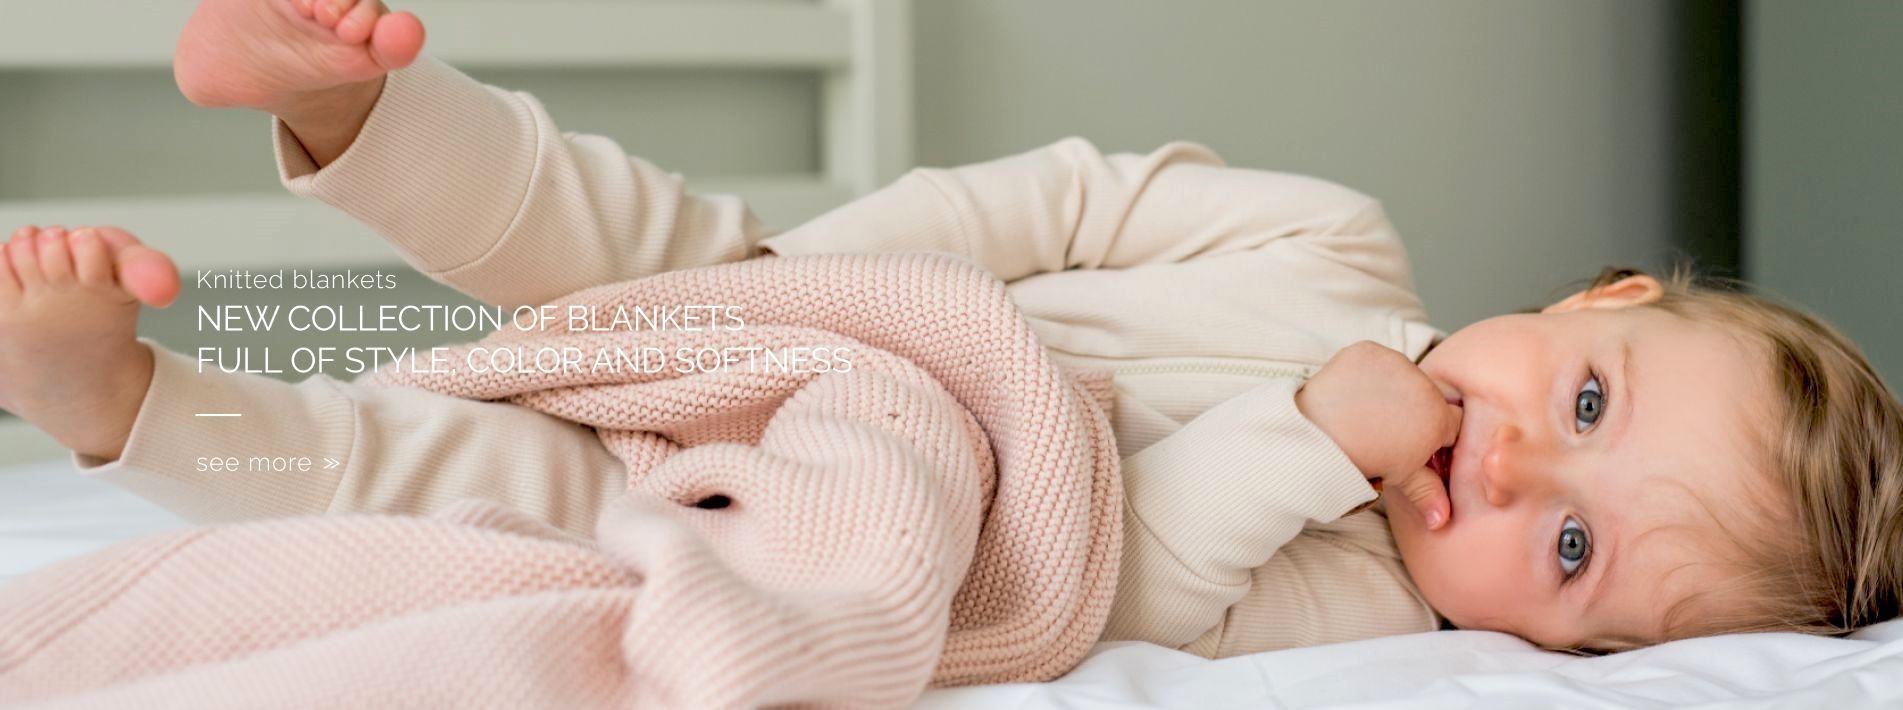 New collection of blankets - full of style, color and softness